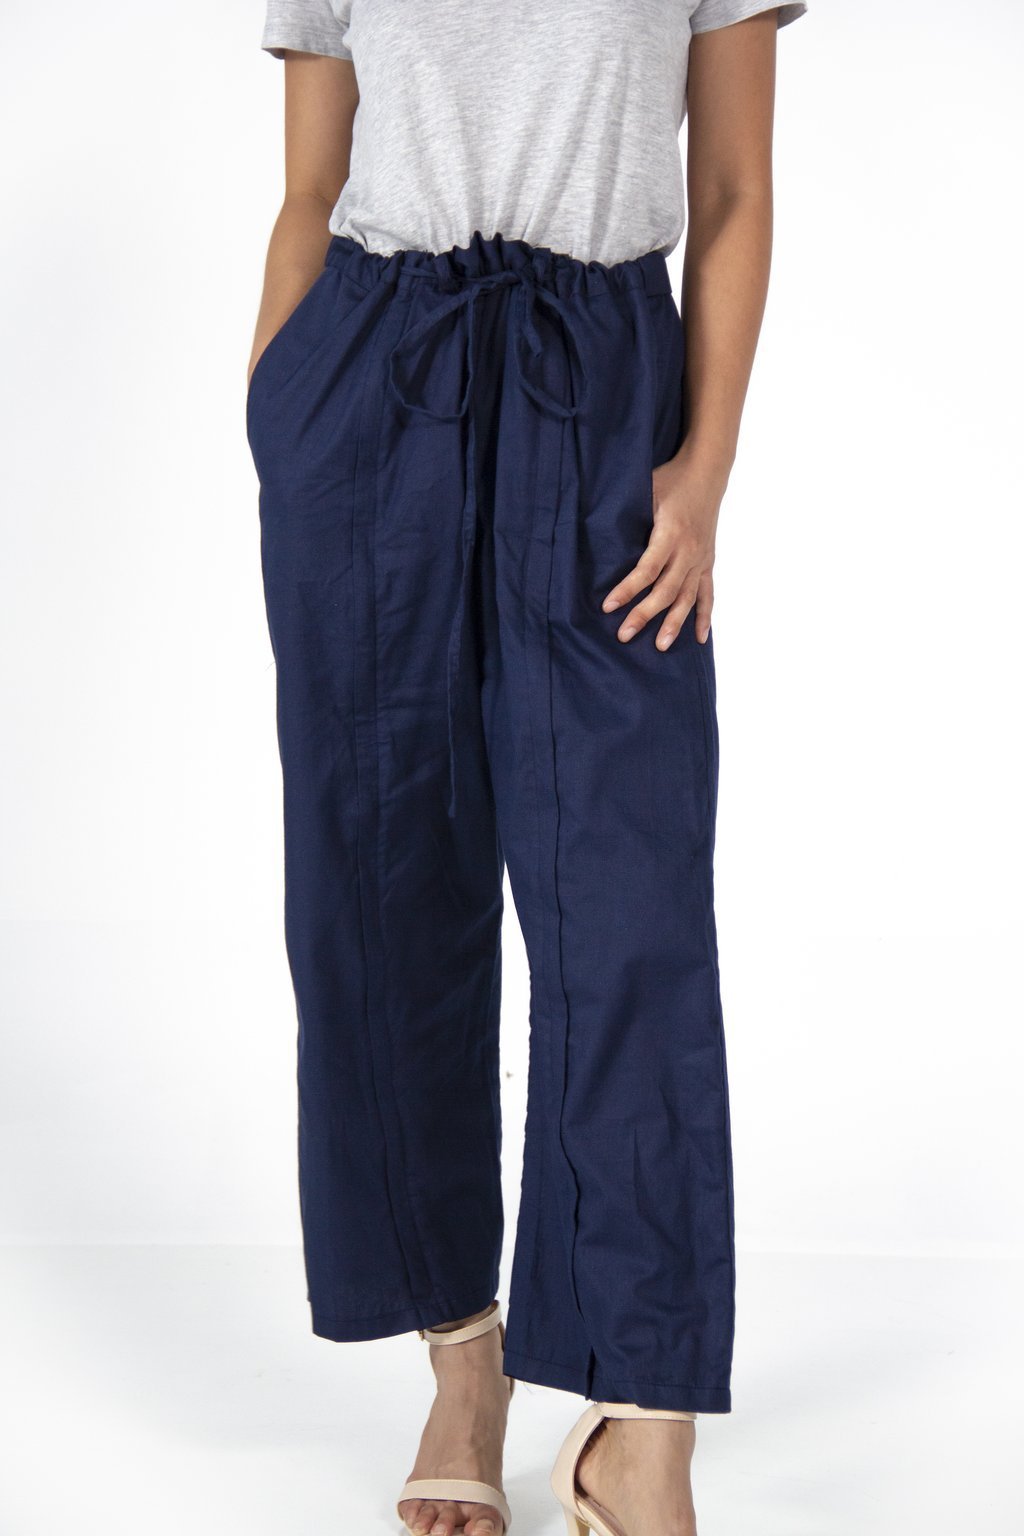 Will & Well Unisex Drawstring Pants With Front Zips Cream / S/M